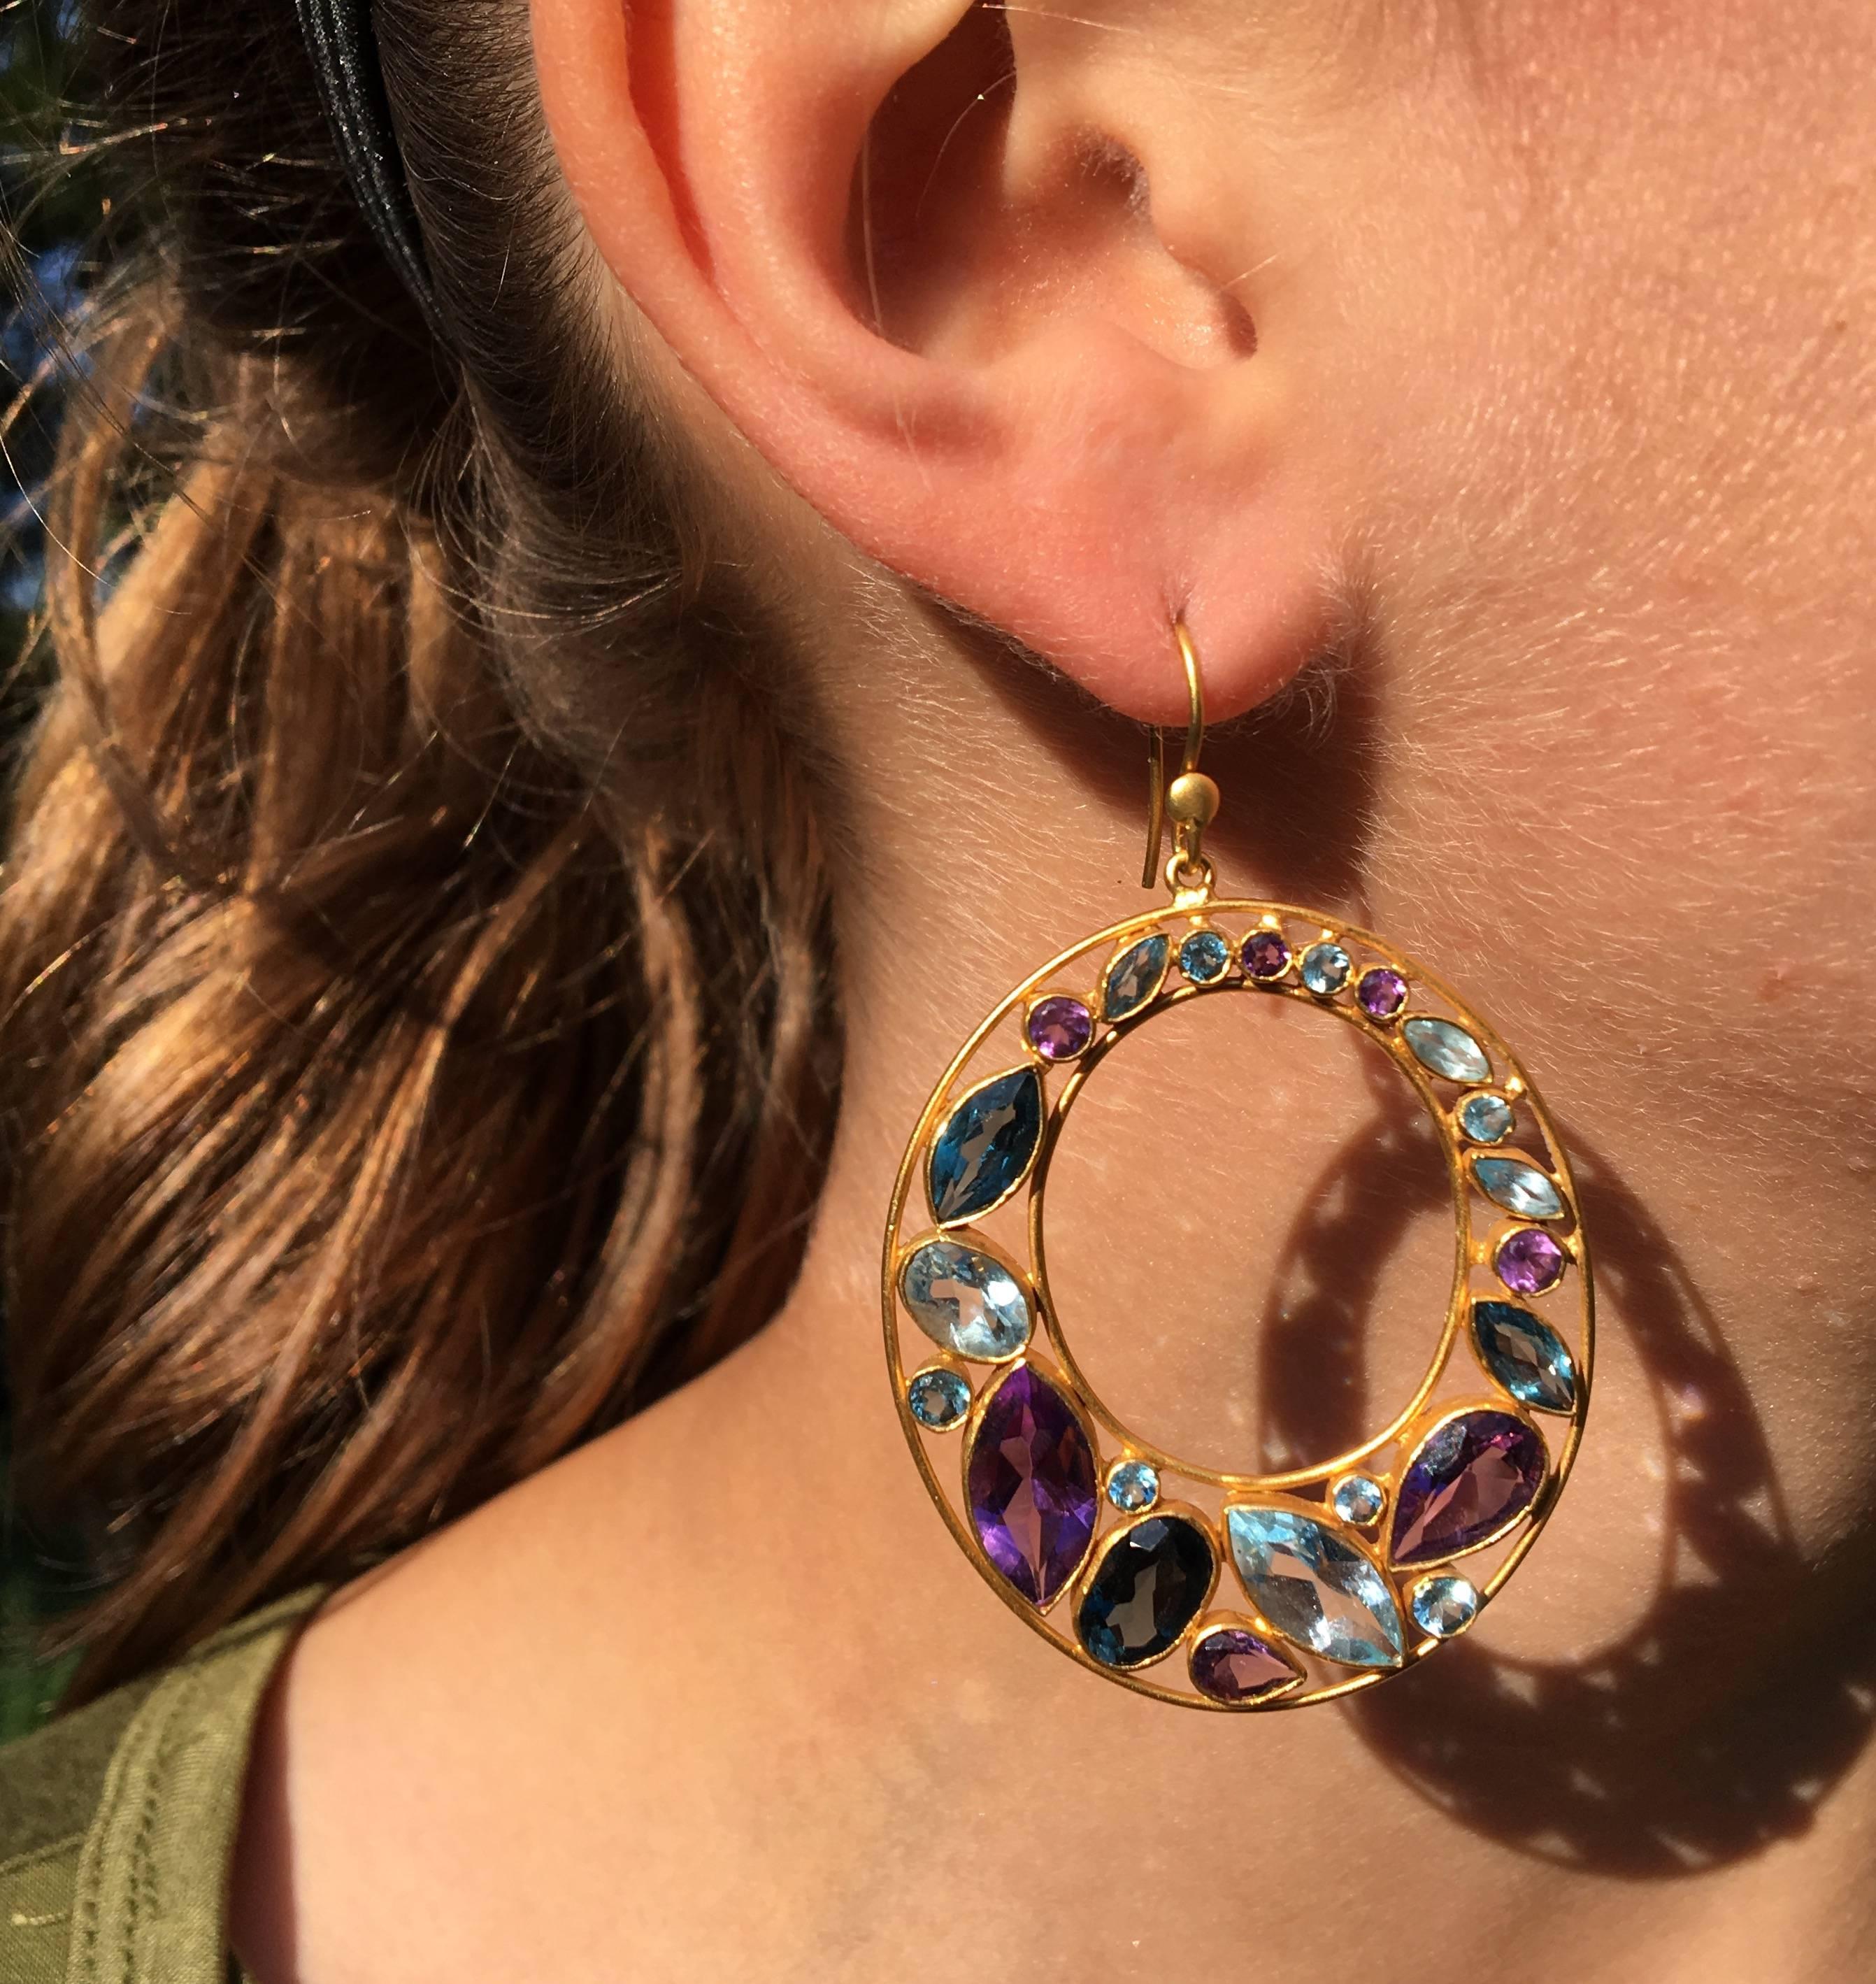 Colorful and bold, these earrings are a really stunning addition to any jewelry wardrobe!  These 18kt Gold earrings feature beautiful Amethyst, deep blue London Blue Topaz, and vibrant Aquamarines, all set in an open oval setting that is flattering